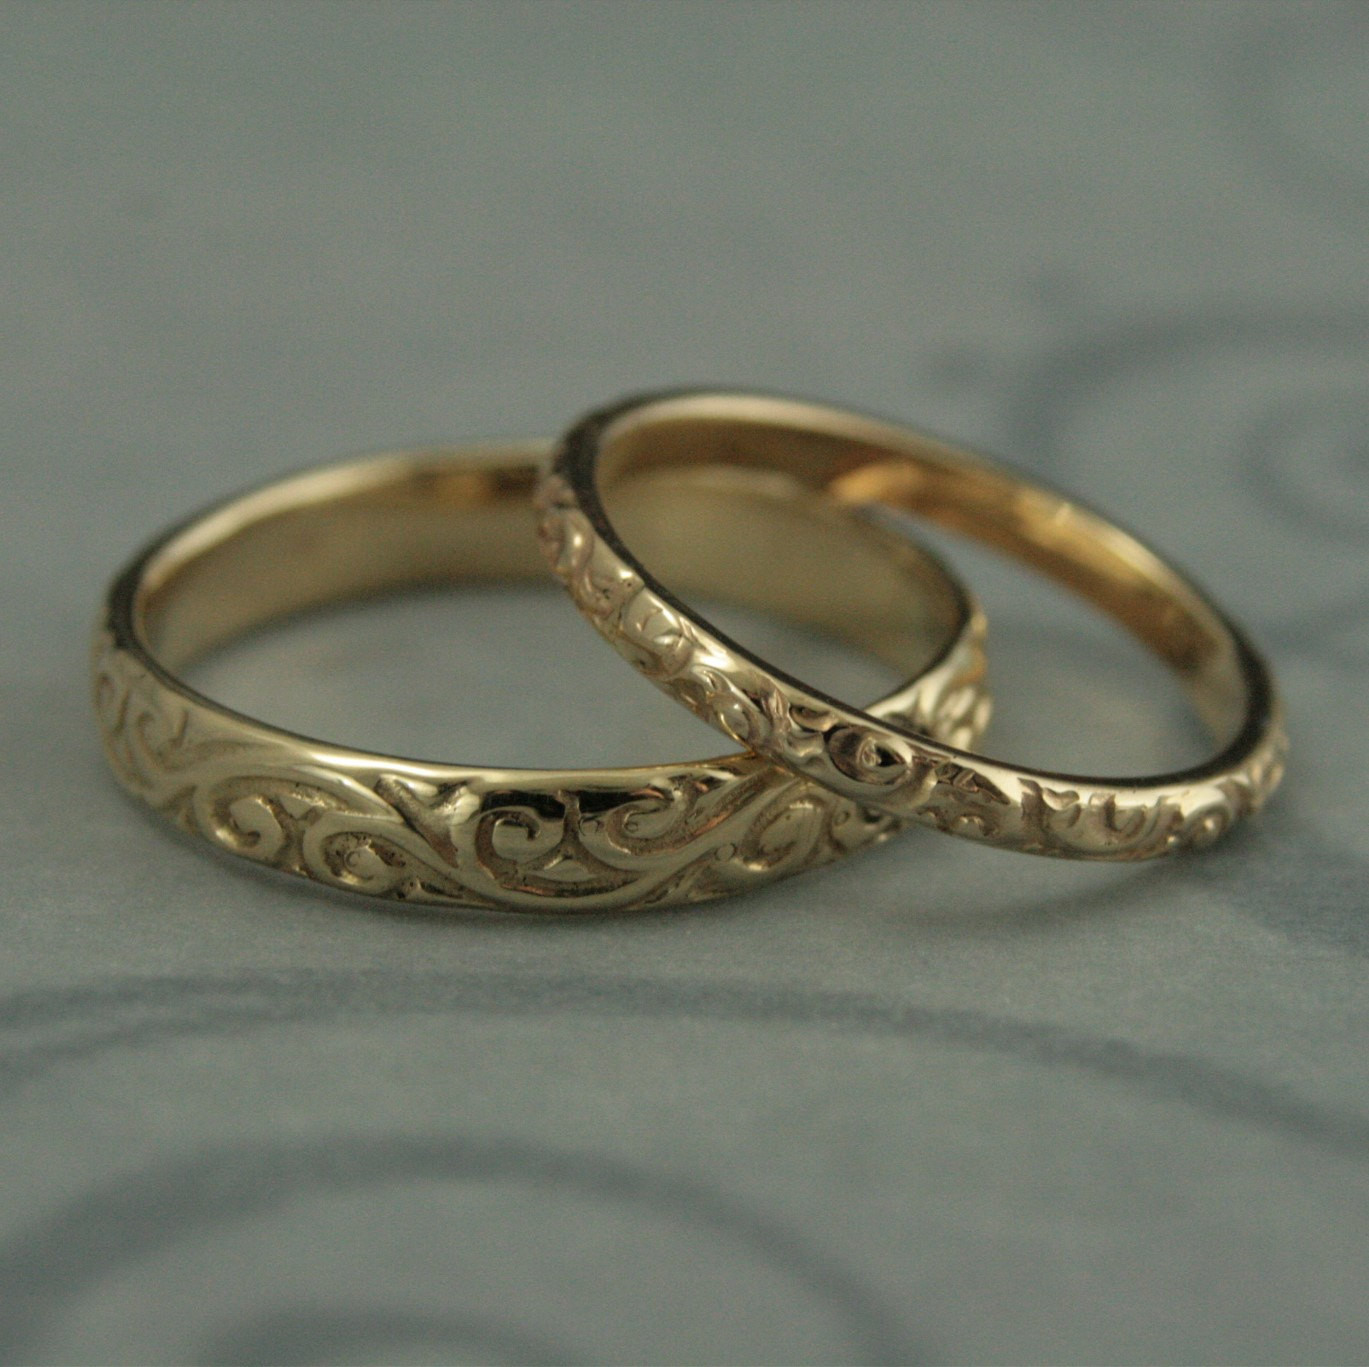 Antique Wedding Ring
 Patterned Wedding Band Set Vintage Style Wedding Rings His and